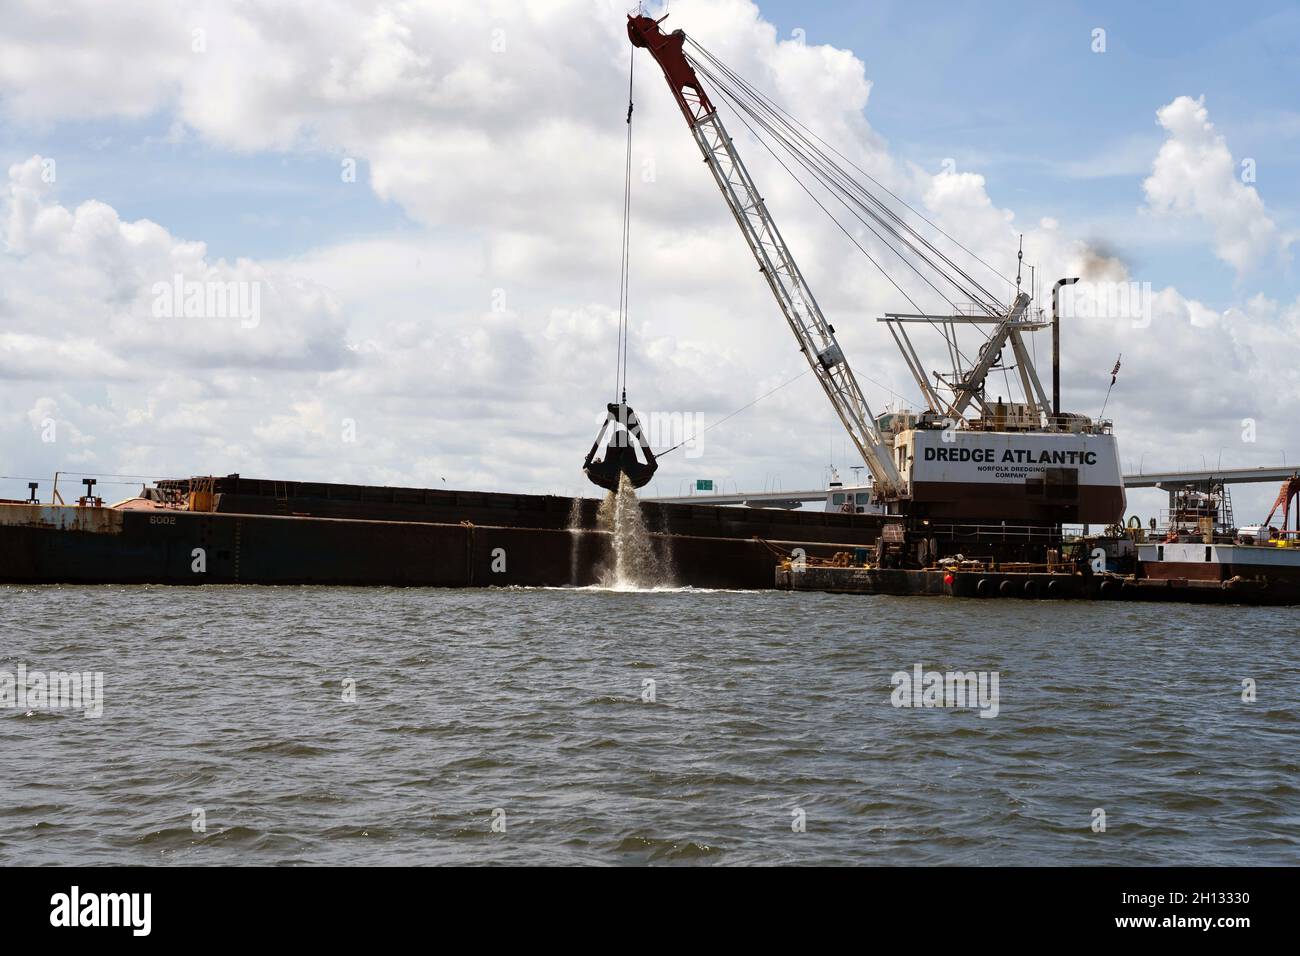 The Dredge Atlantic is one of the many vessels working on the Charleston Harbor Post 45 Deepening Project. Stock Photo